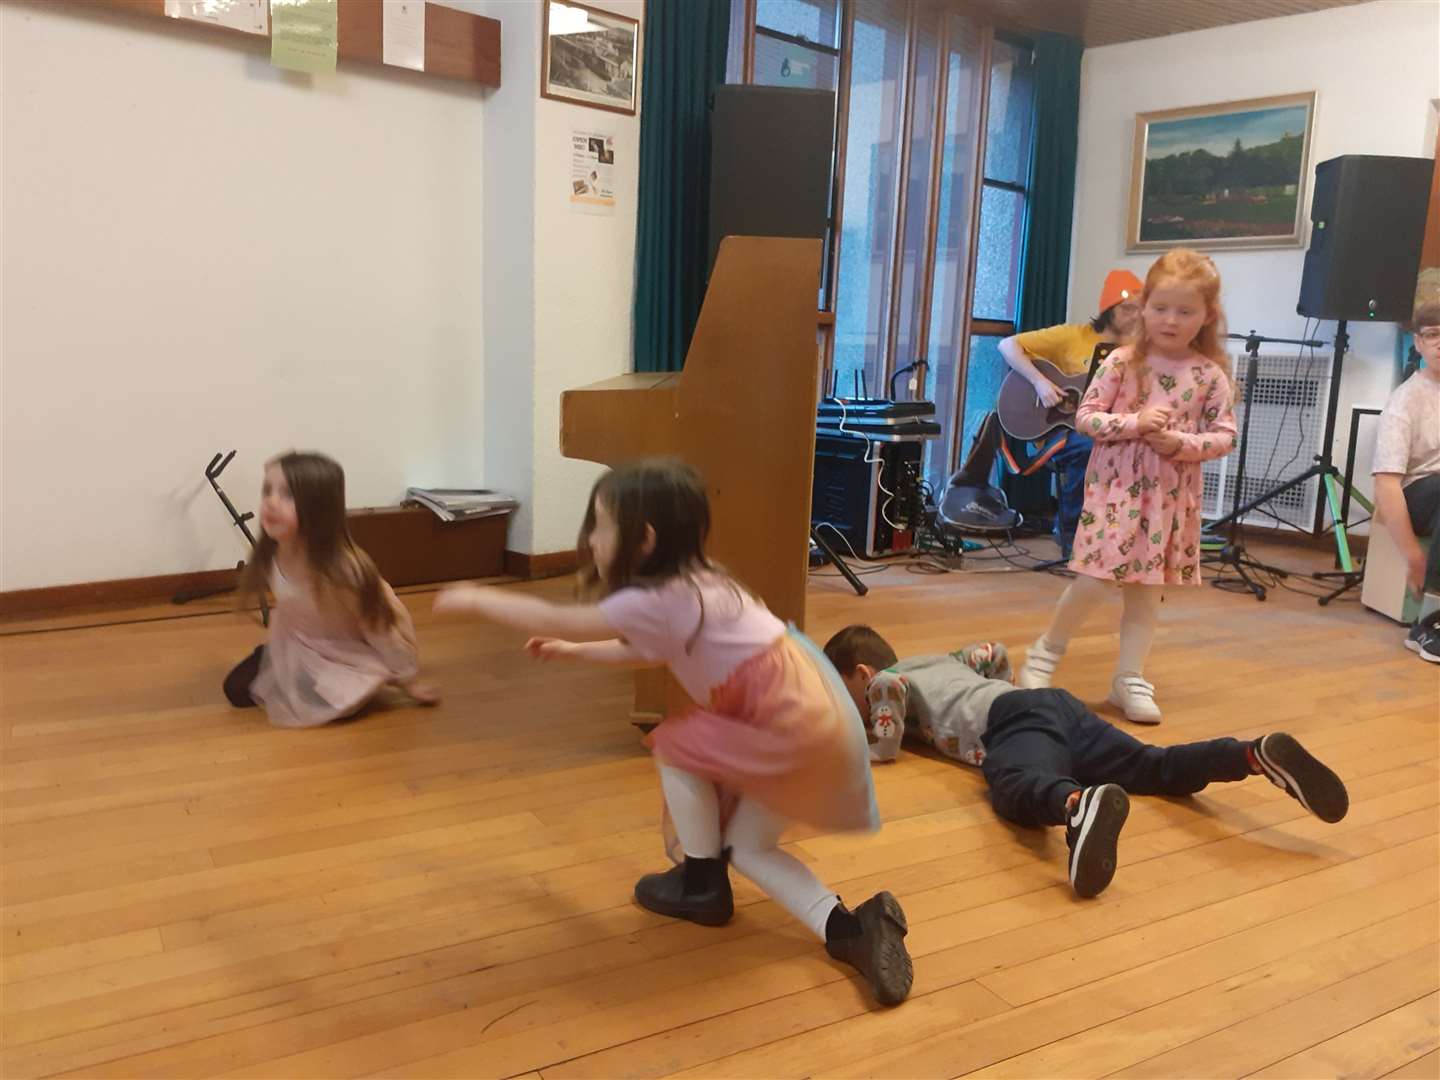 Children dancing in The Coffee House during the open mic session.